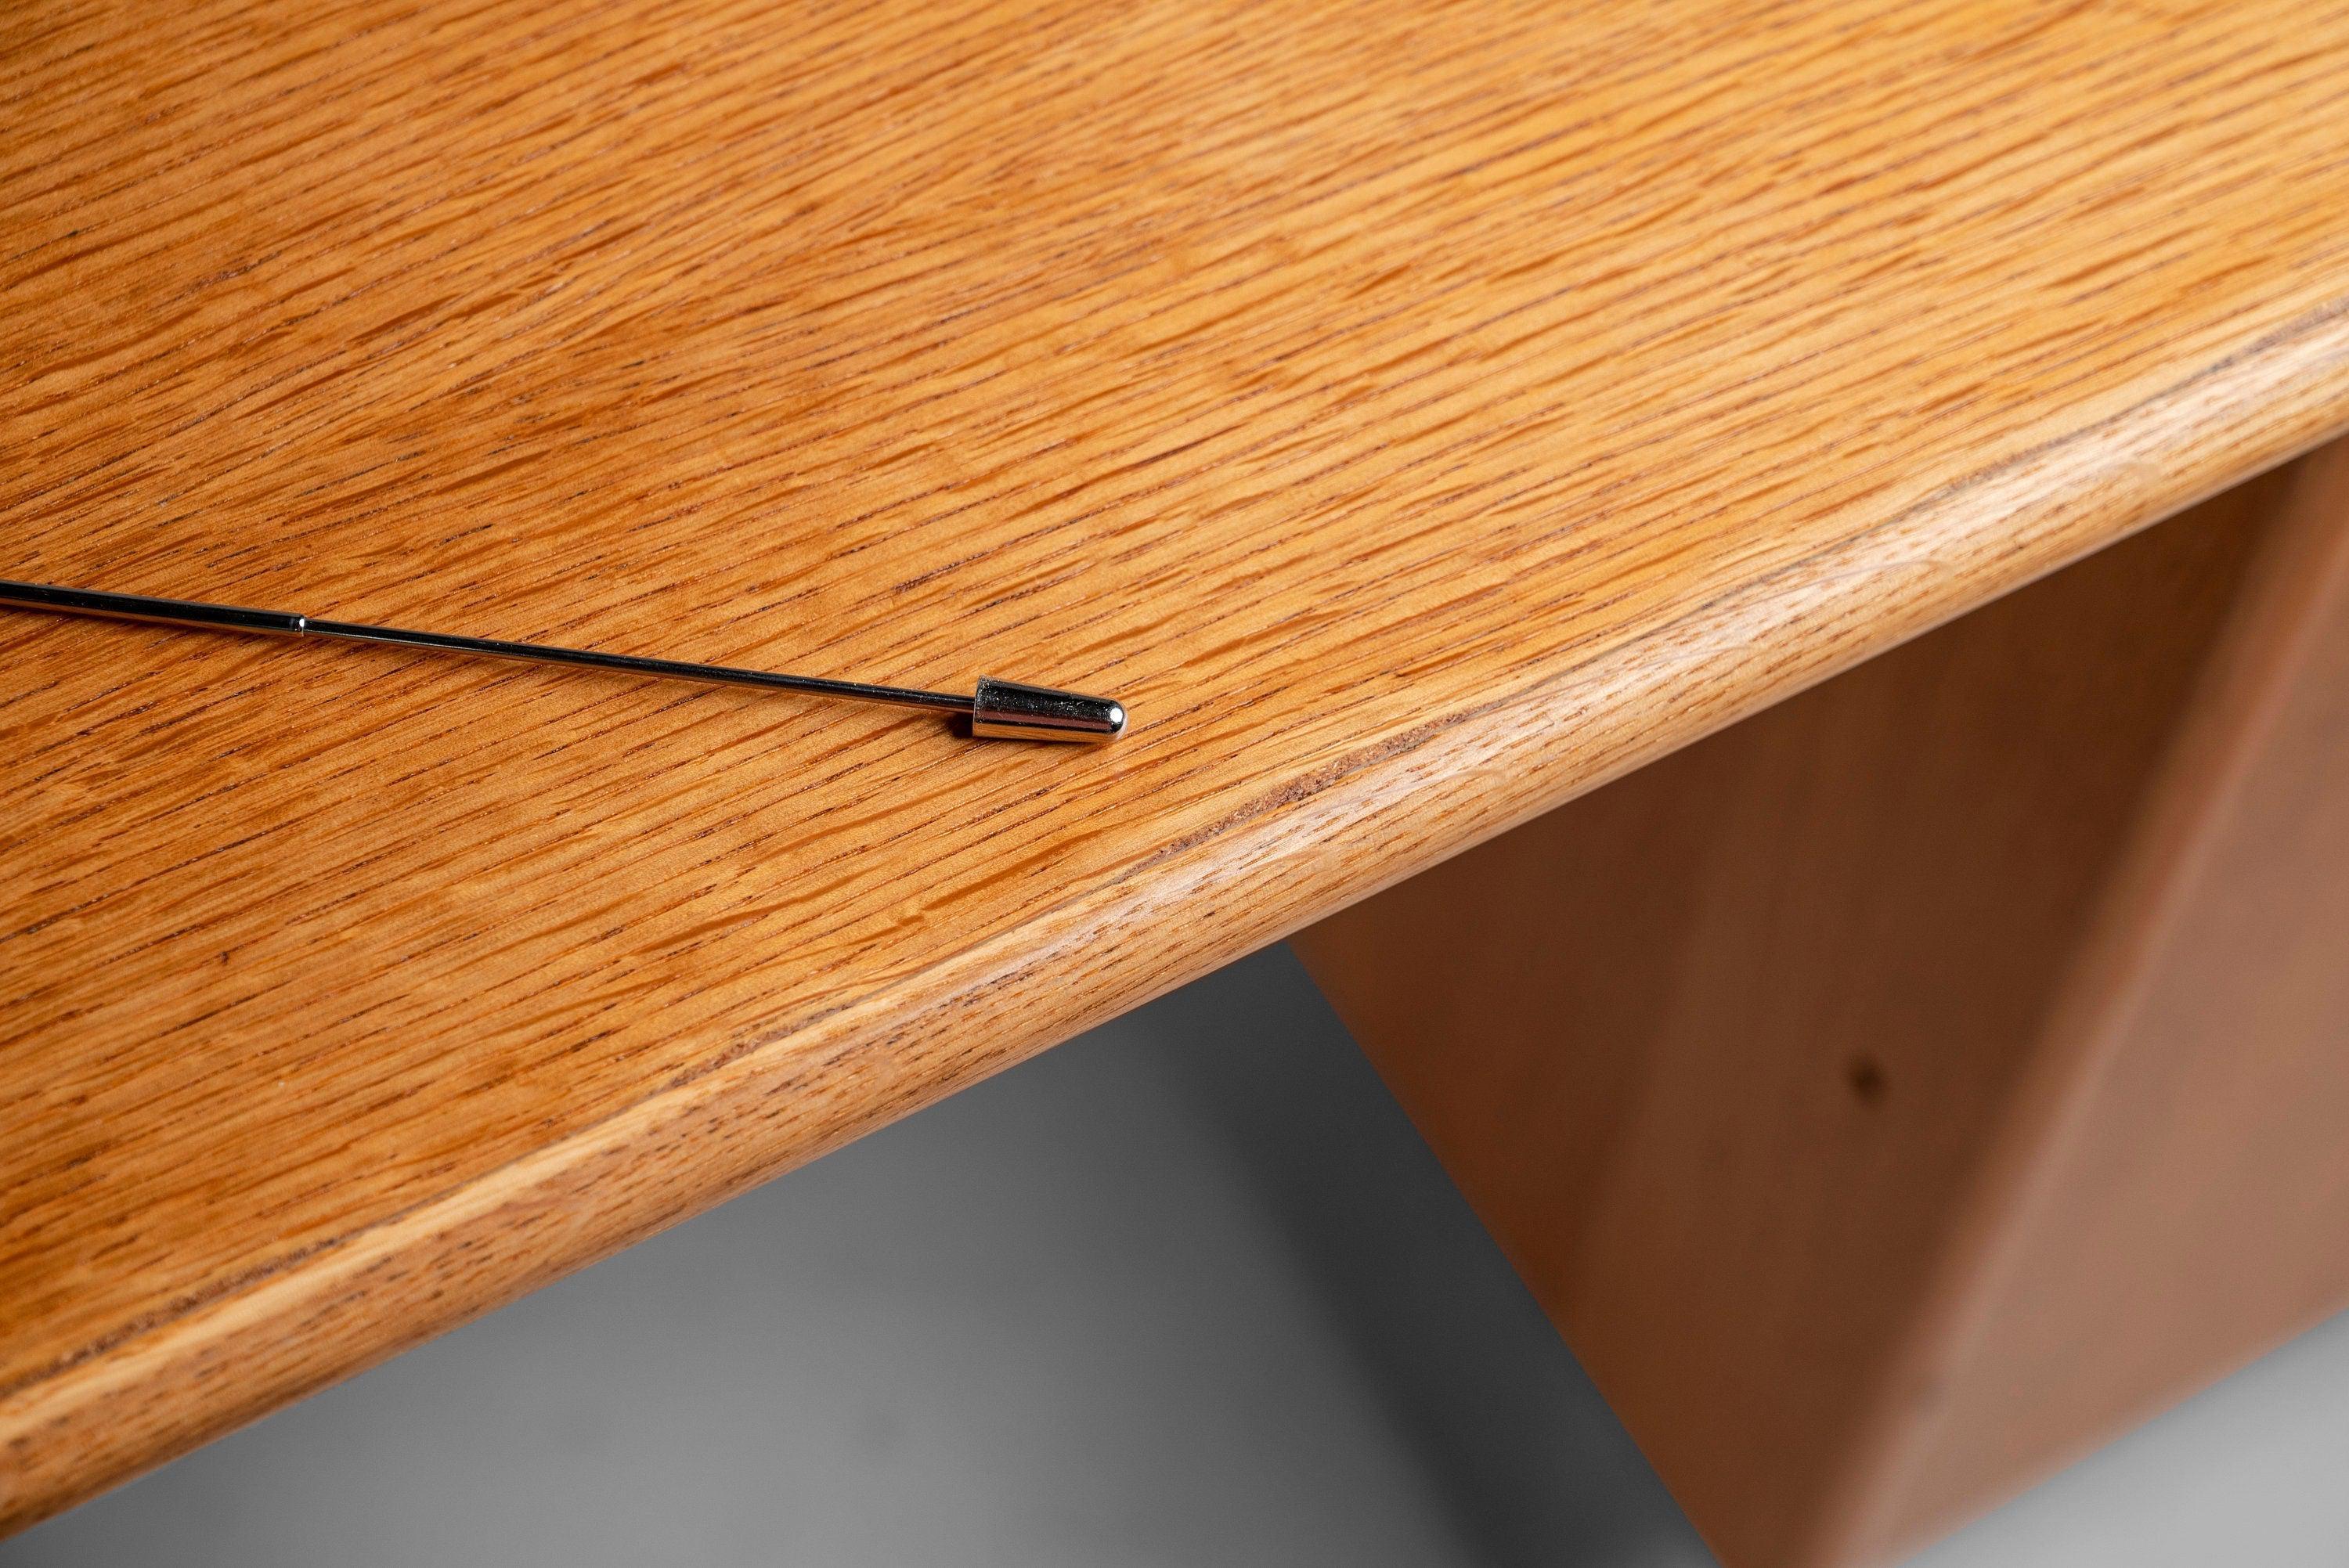 Signatur Executive Desk by Tord Bjorklund in Oak and Chrome, Sweden, c. 1980 For Sale 3